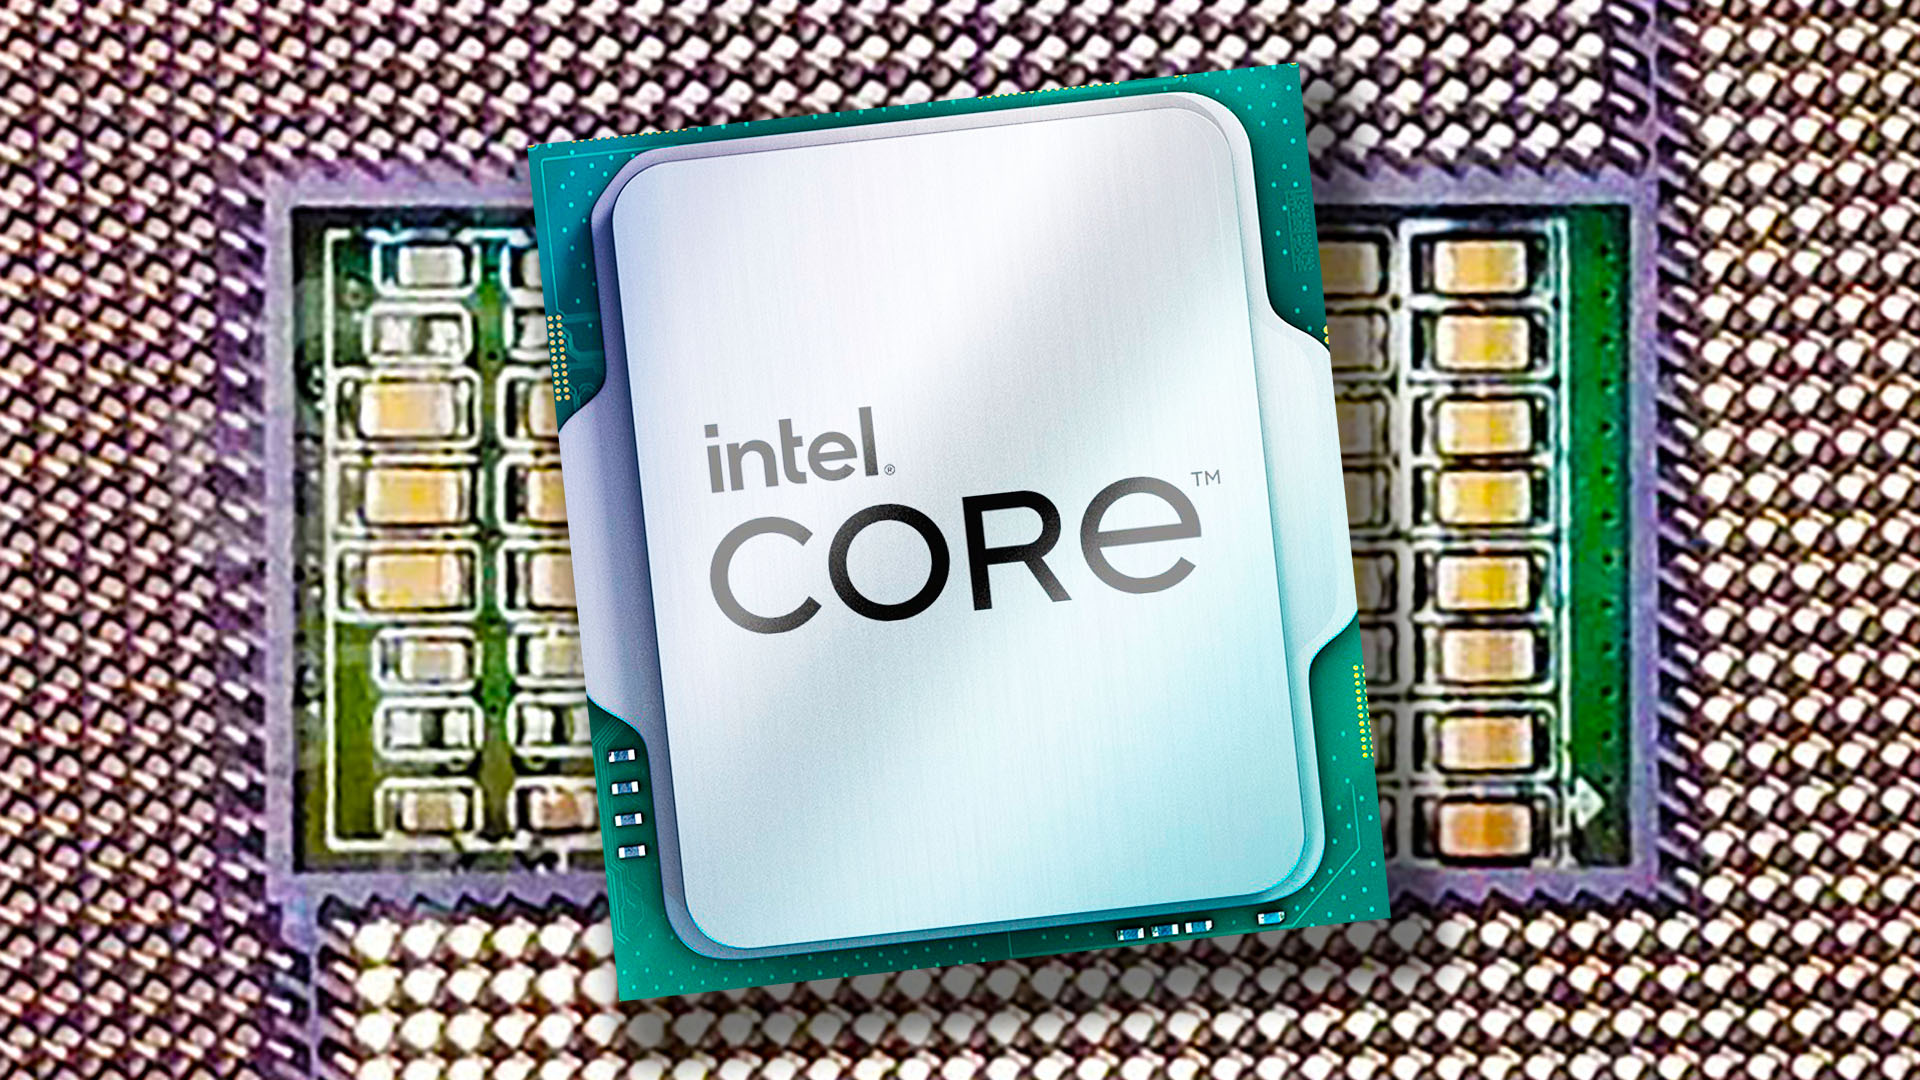 Intel's new Arrow Lake CPU socket has just been revealed